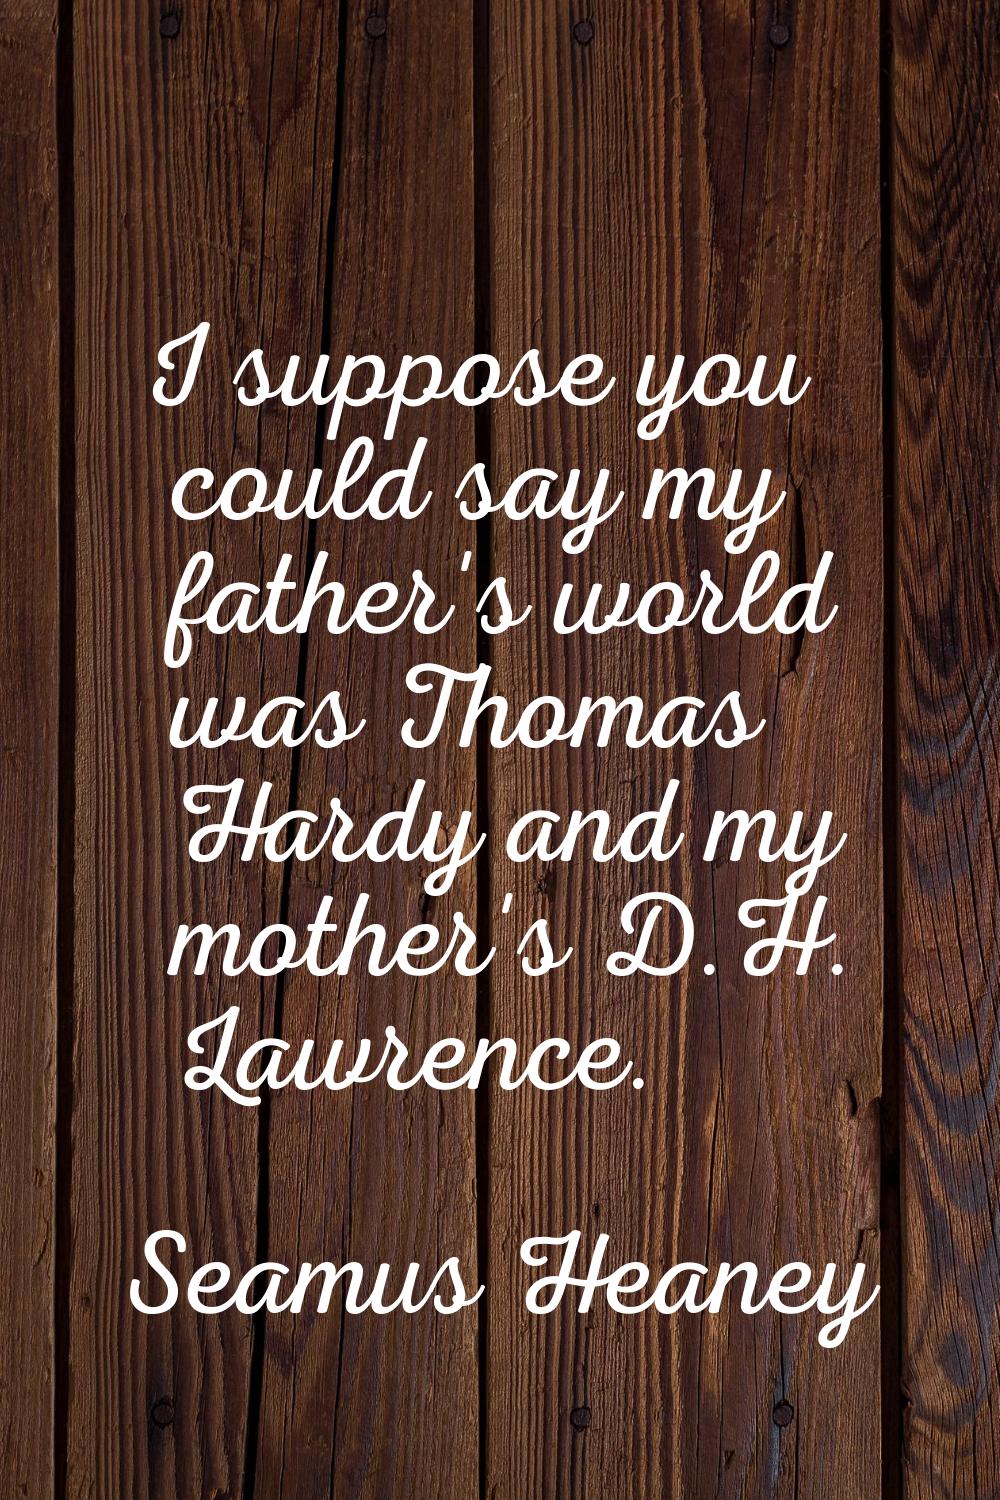 I suppose you could say my father's world was Thomas Hardy and my mother's D.H. Lawrence.